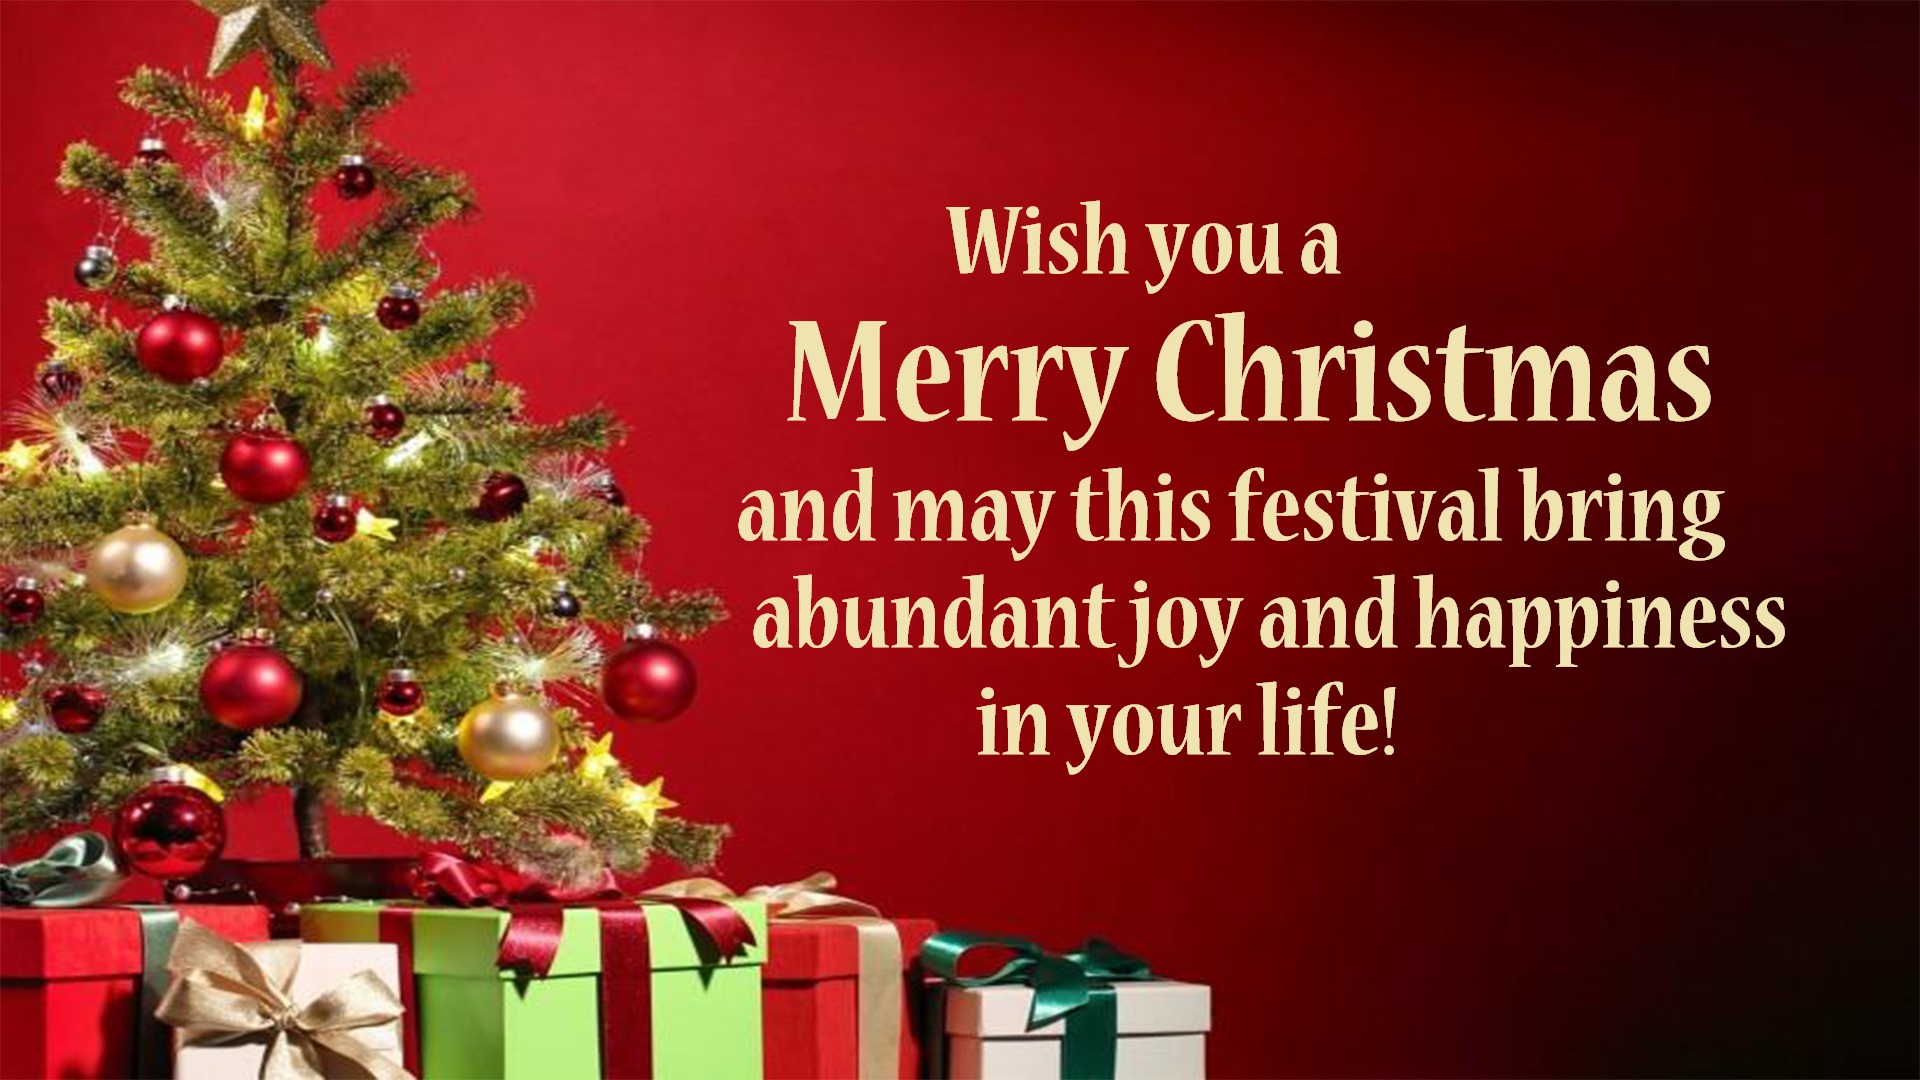 merry christmas wishes image hd 2017